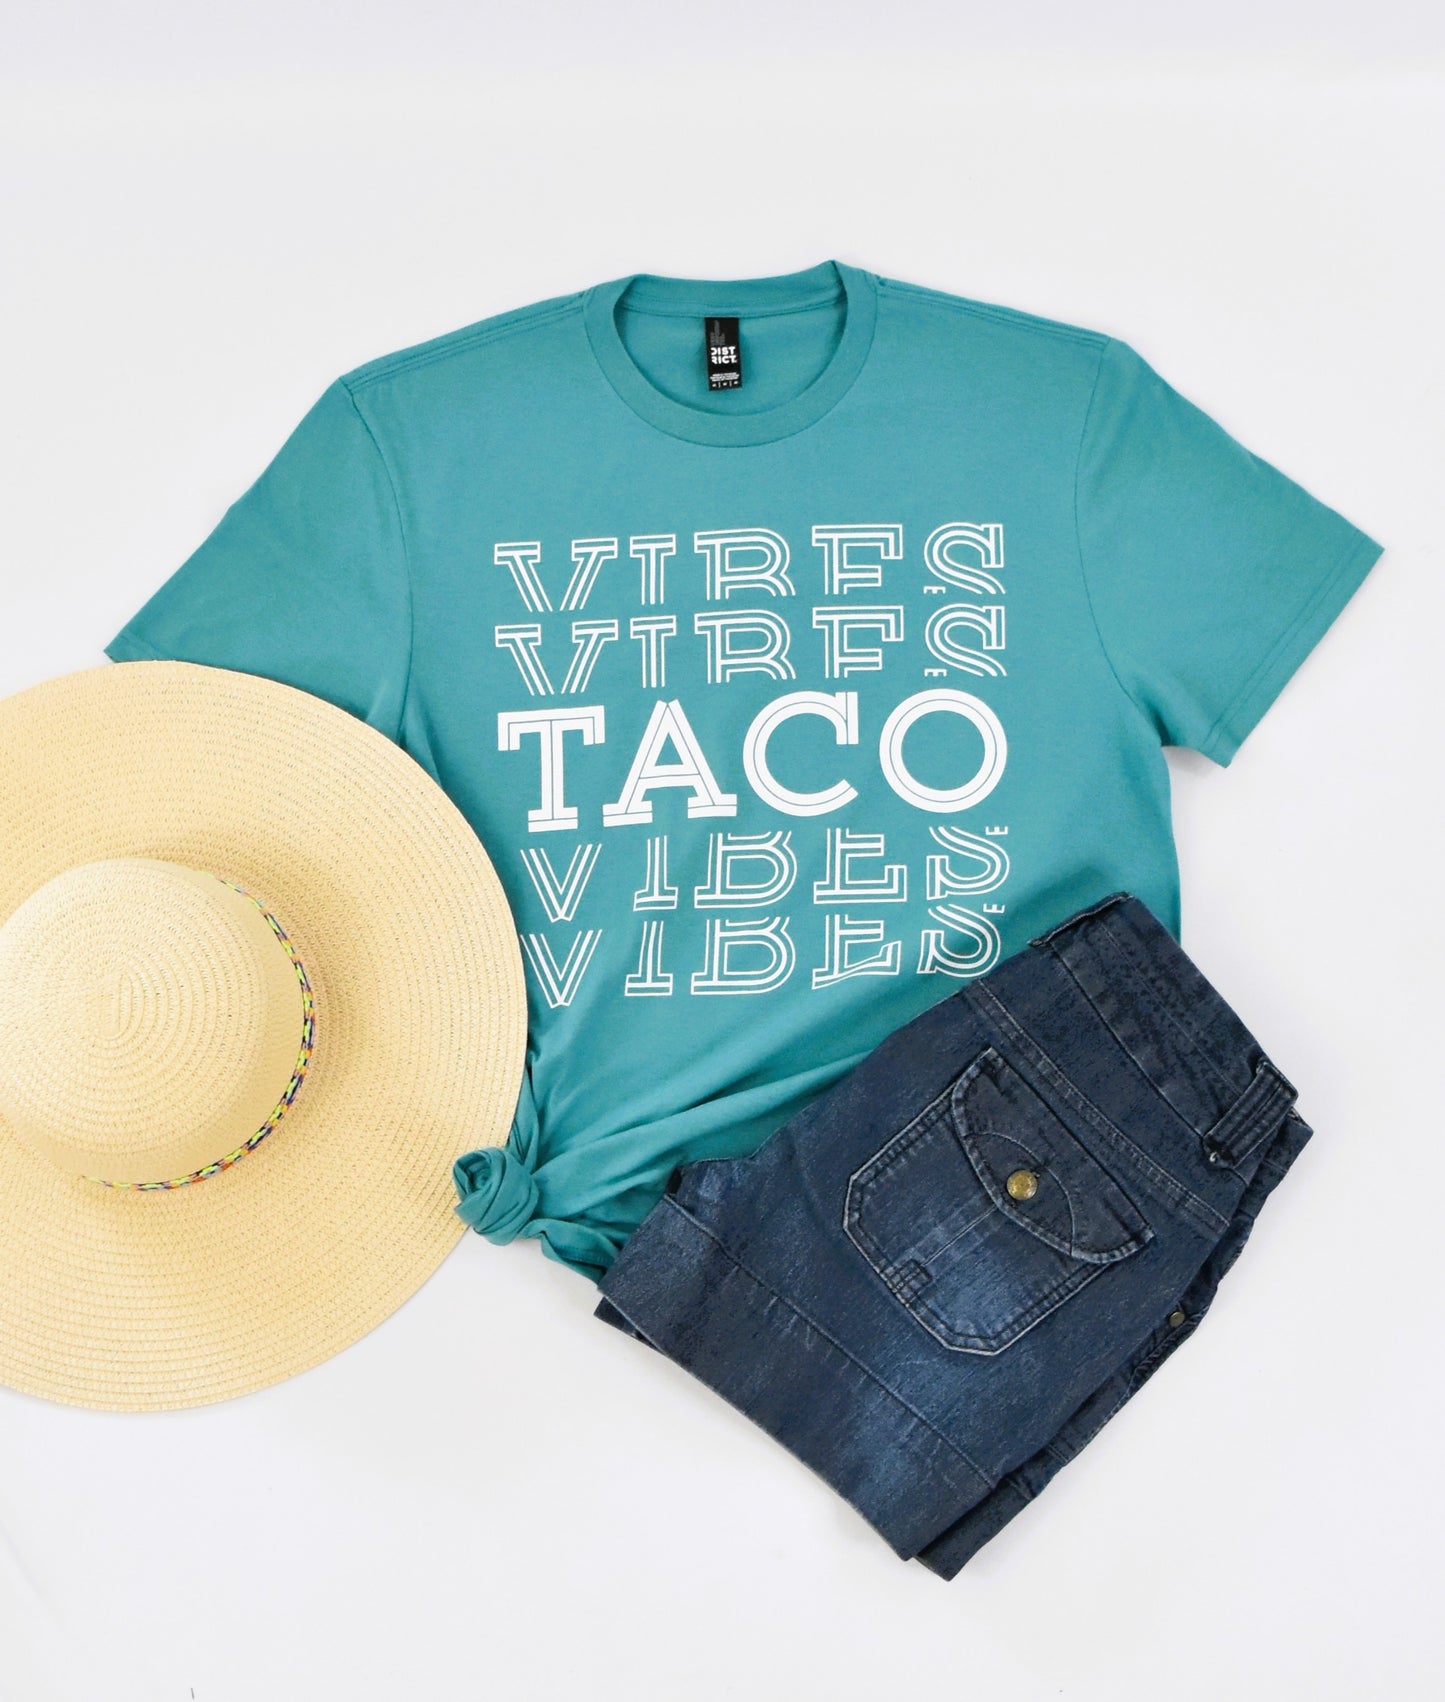 Taco Vibes T-Shirt - 10 MEALion challenge